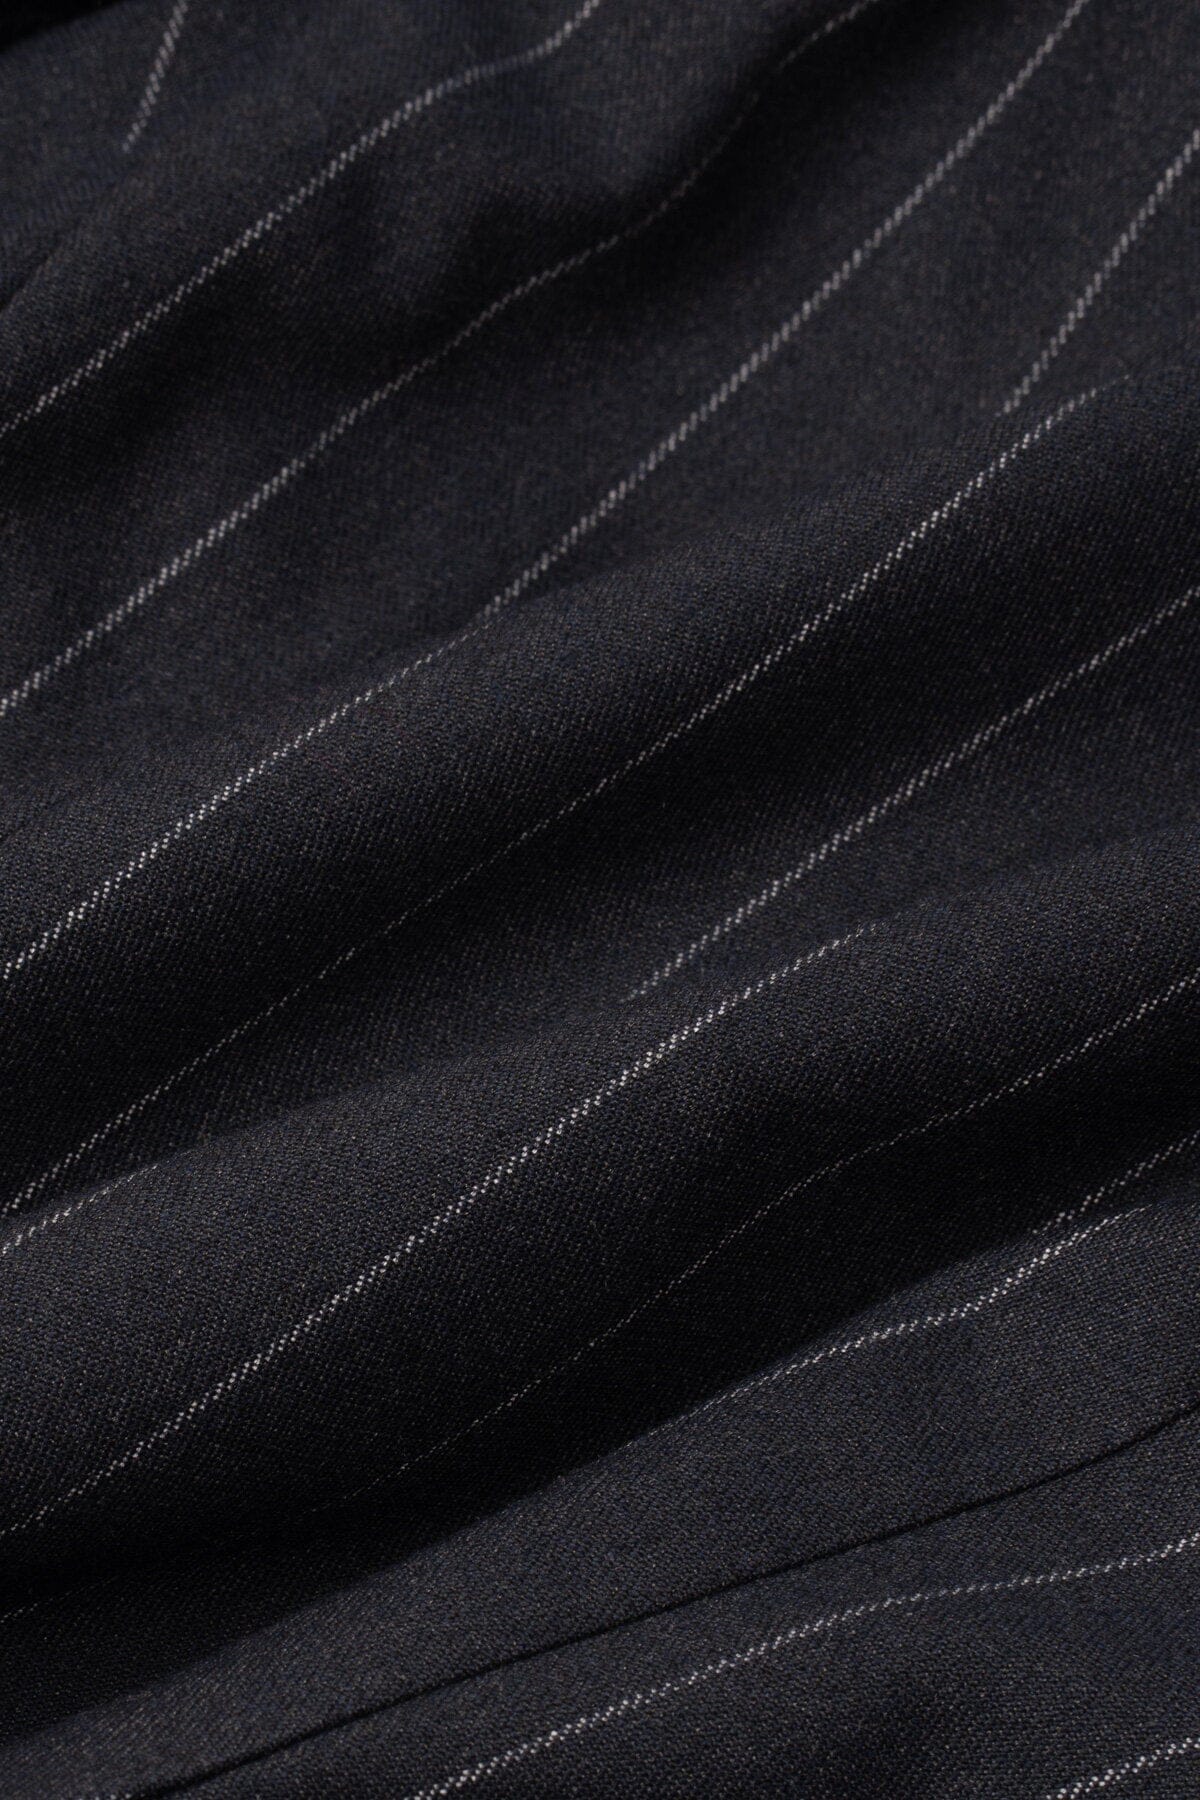 Invincible Navy Pinstripe Suit Swatch - Swatch - 